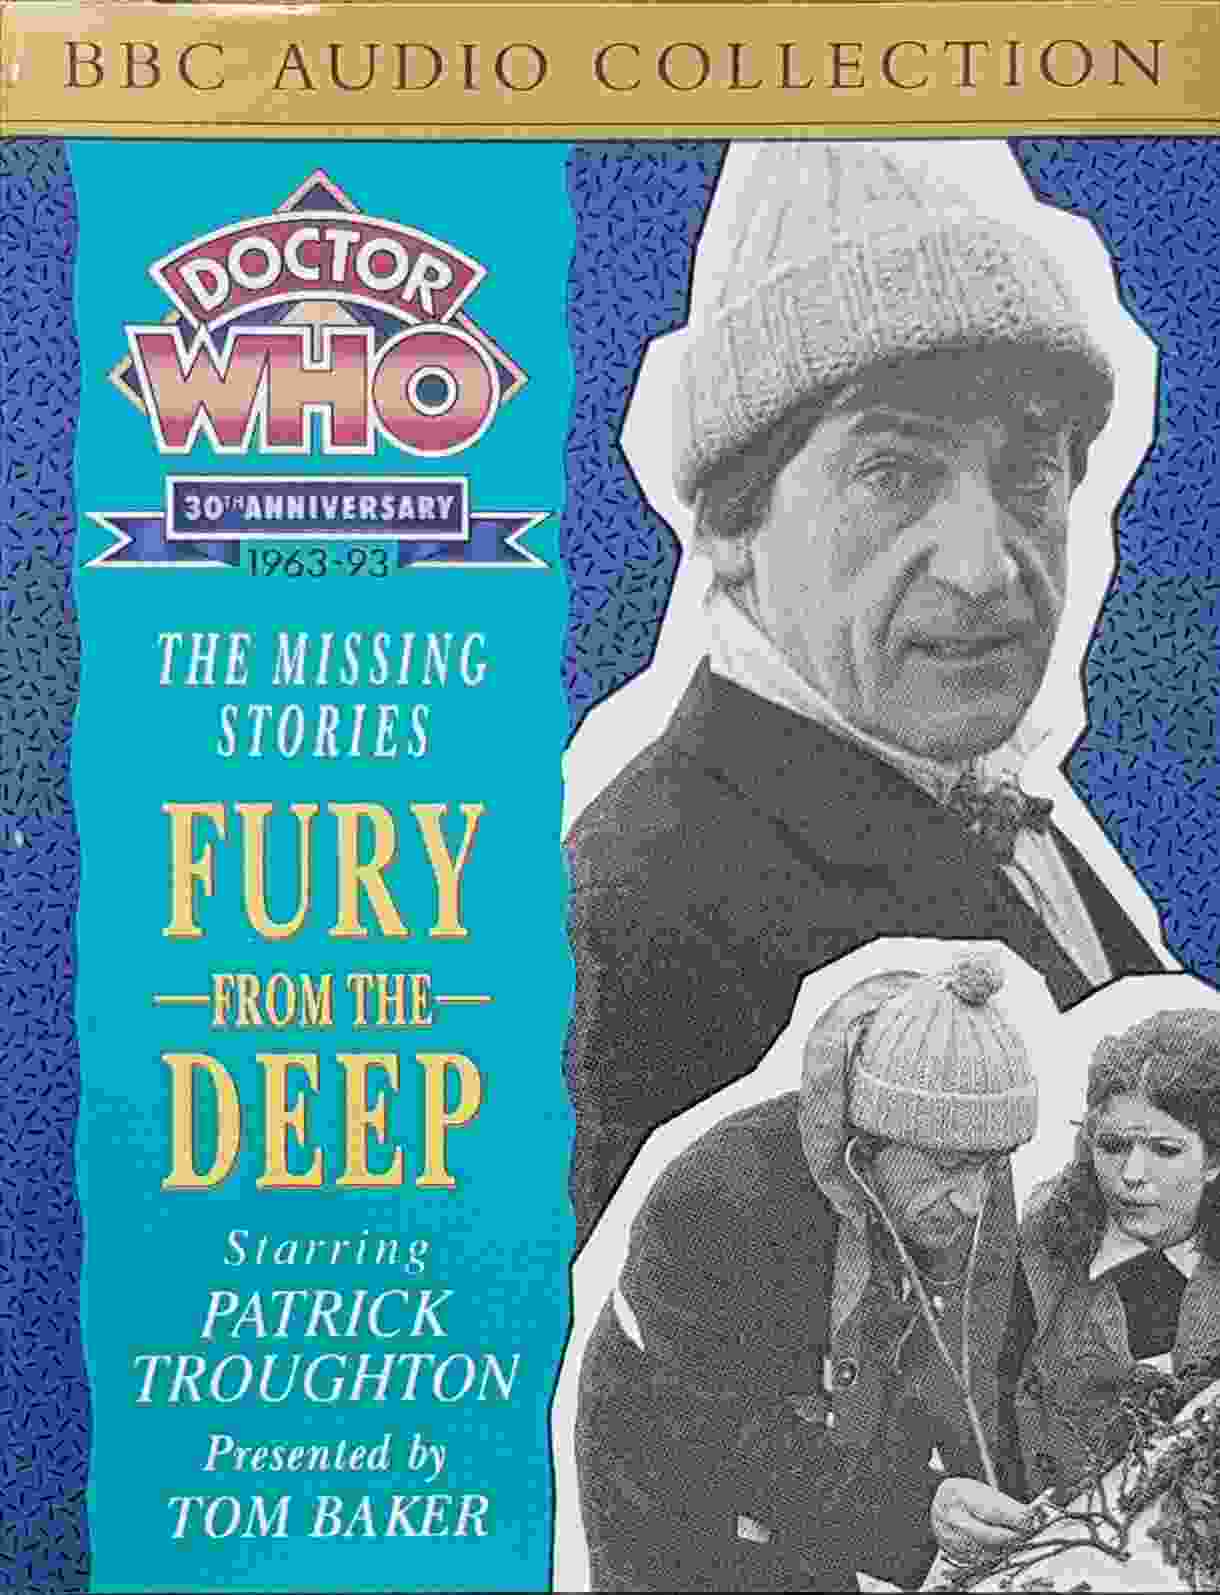 Picture of Doctor Who - Fury from the deep by artist Victor Pemberton from the BBC cassettes - Records and Tapes library